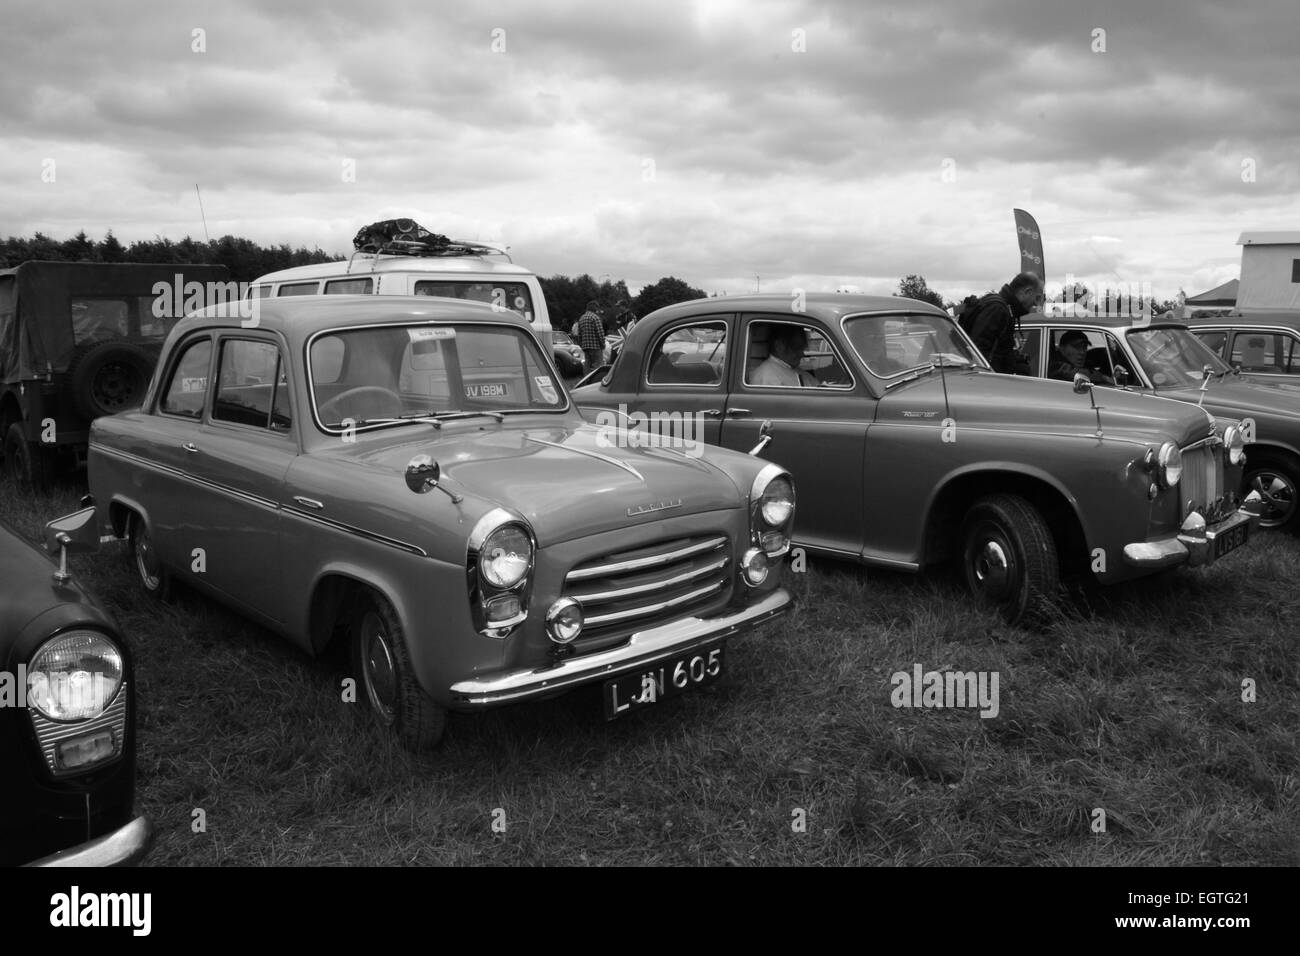 small vintage car black and white Stock Photo